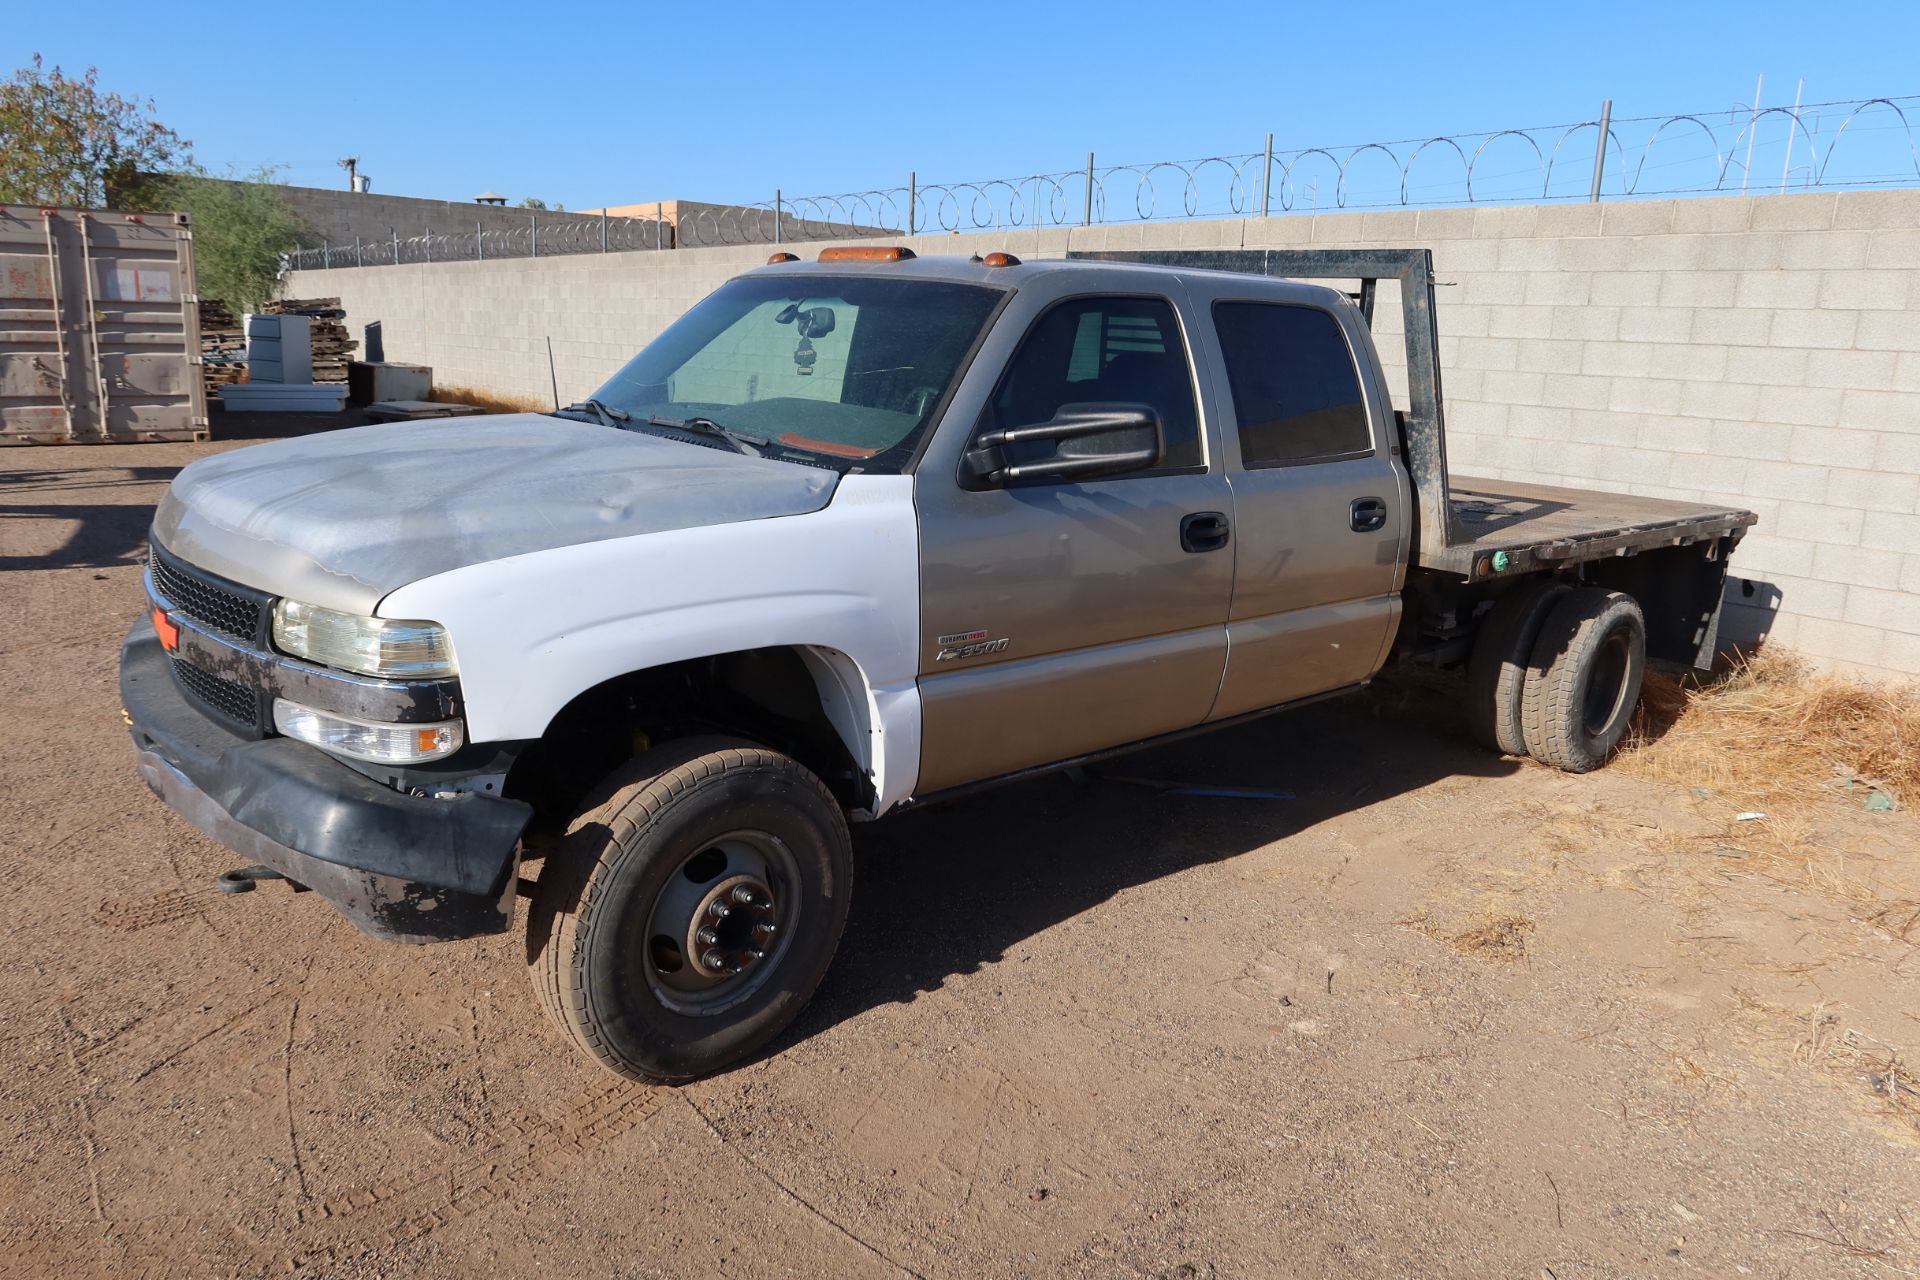 2002 CHEVROLET 3500 LT HD DIESEL 9' FLATBED, CREW CAB, TRUCK LOOKS LIKE HELL, BUT RUNS GREAT. 30290 - Image 3 of 14